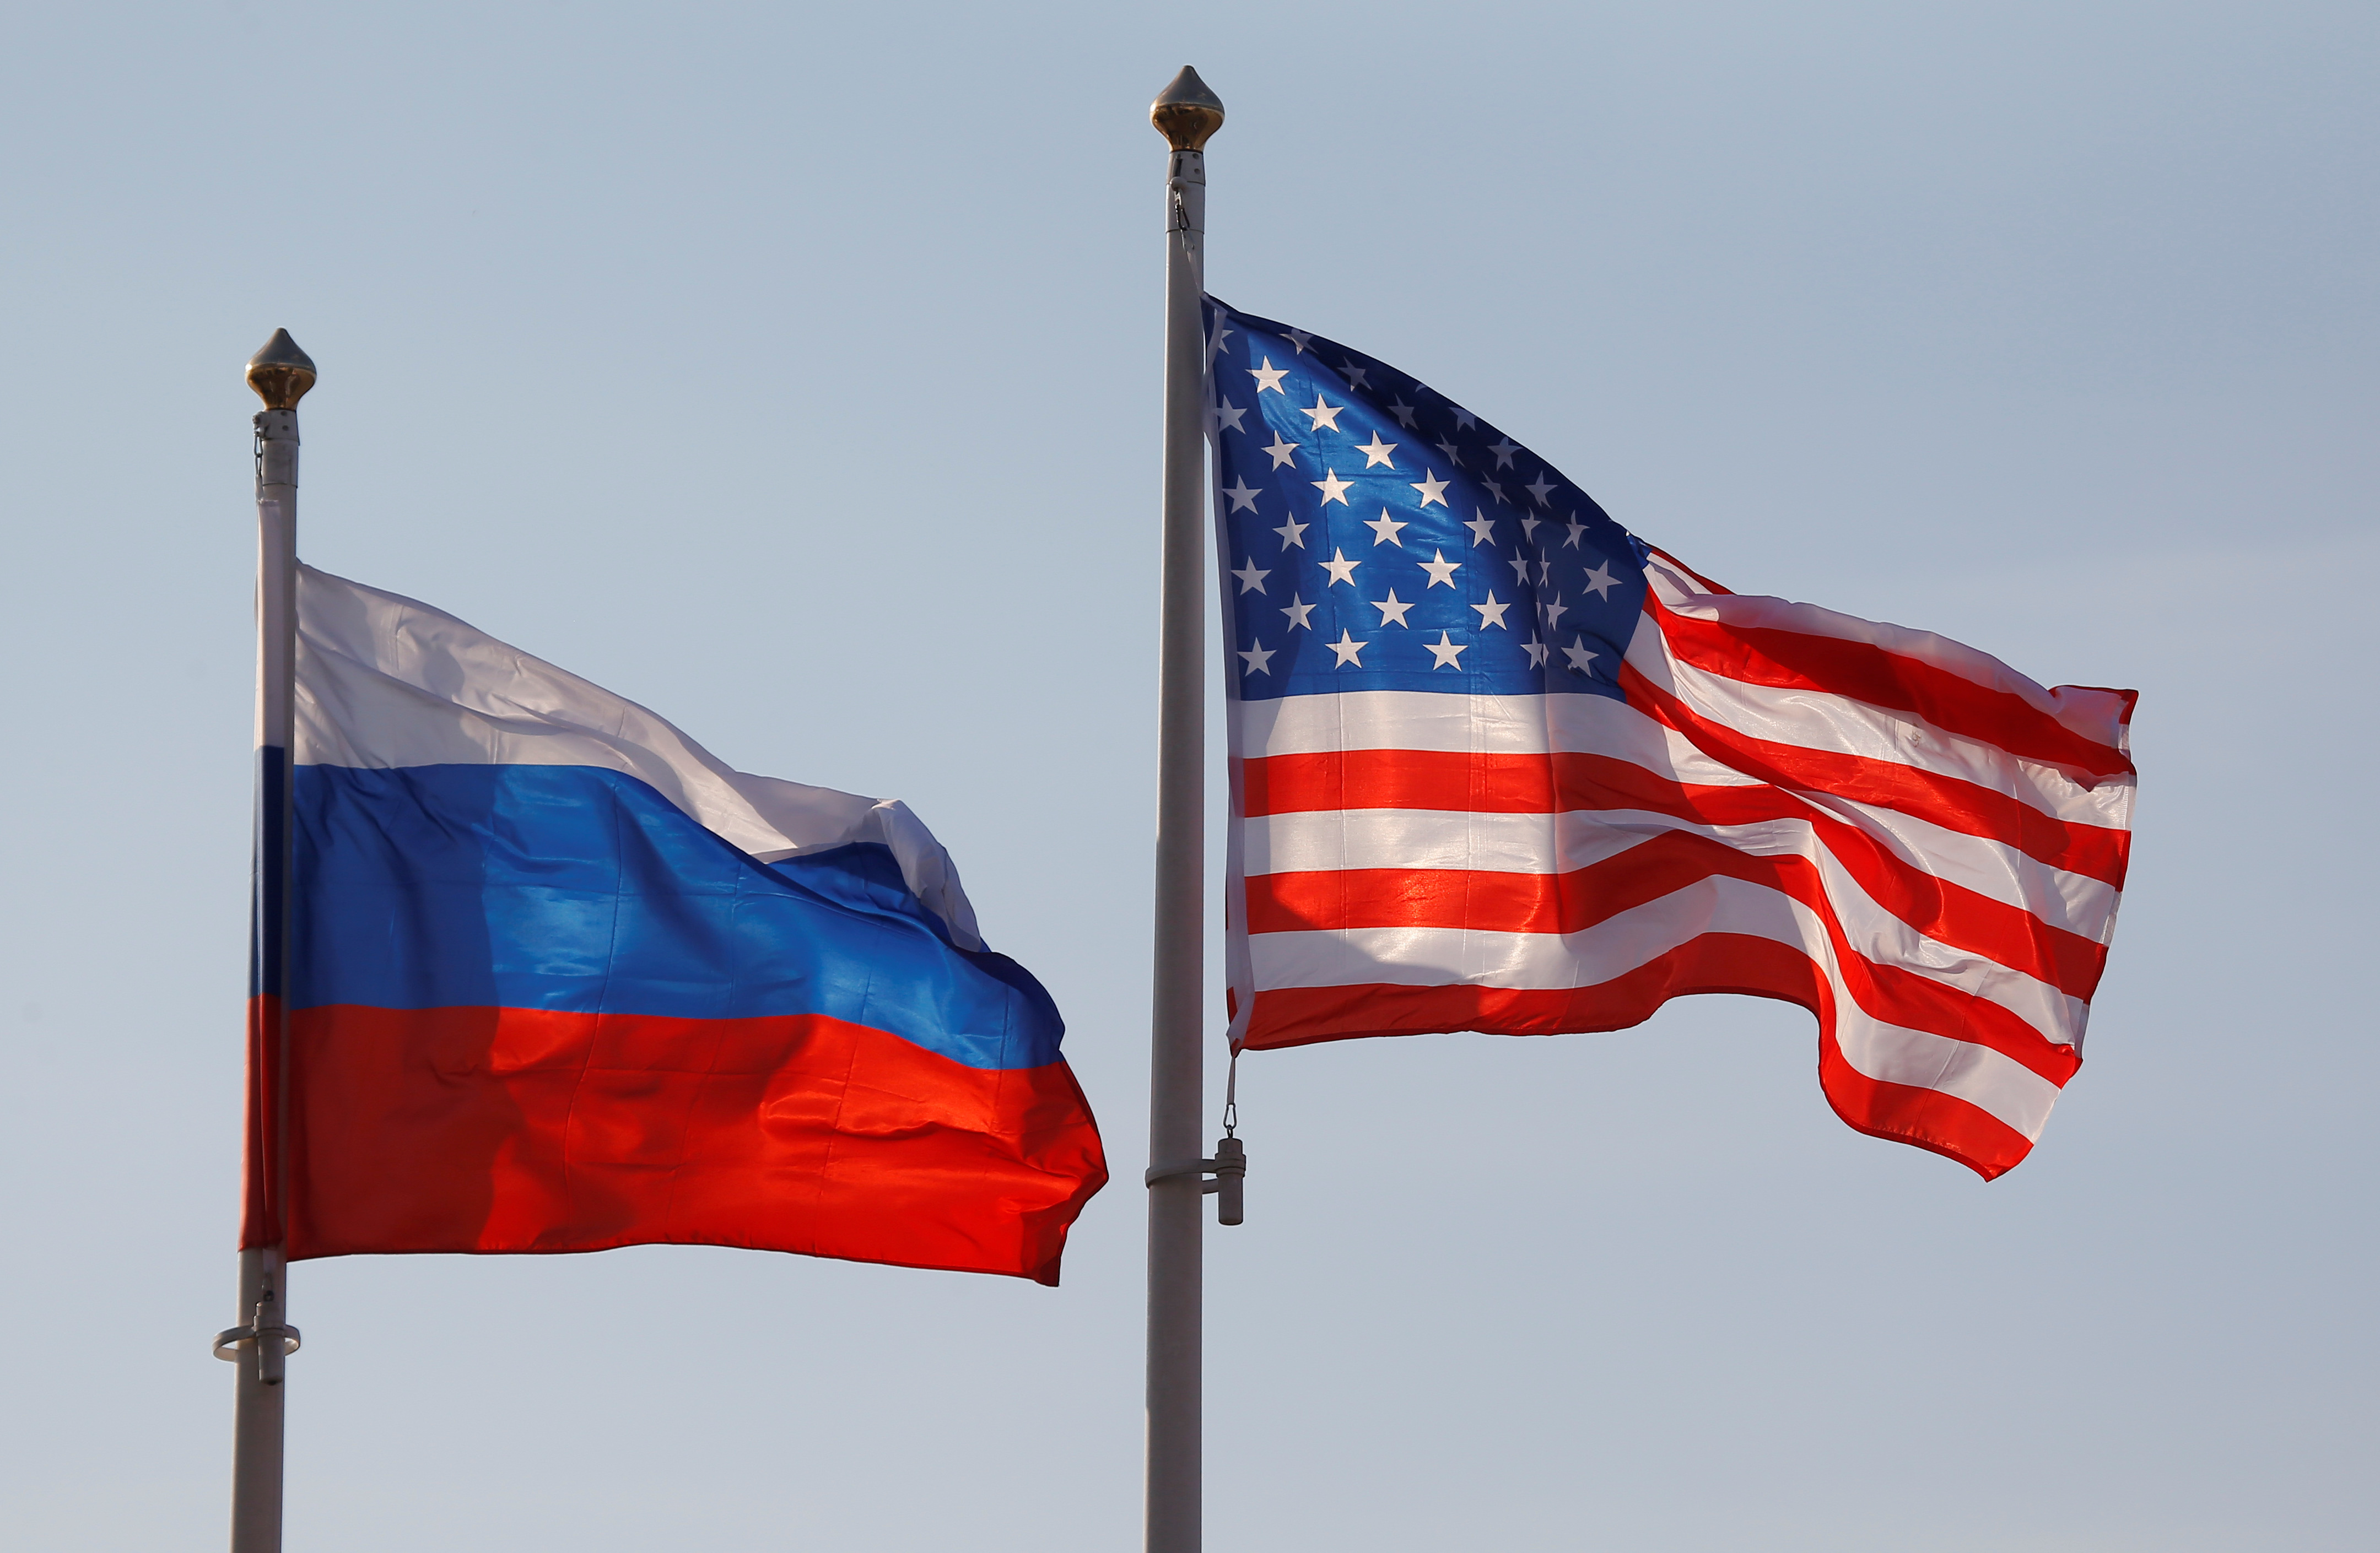 EXCLUSIVE Results of Russian sanctions 'pretty close' to hopes so far -U.S.  official | Reuters